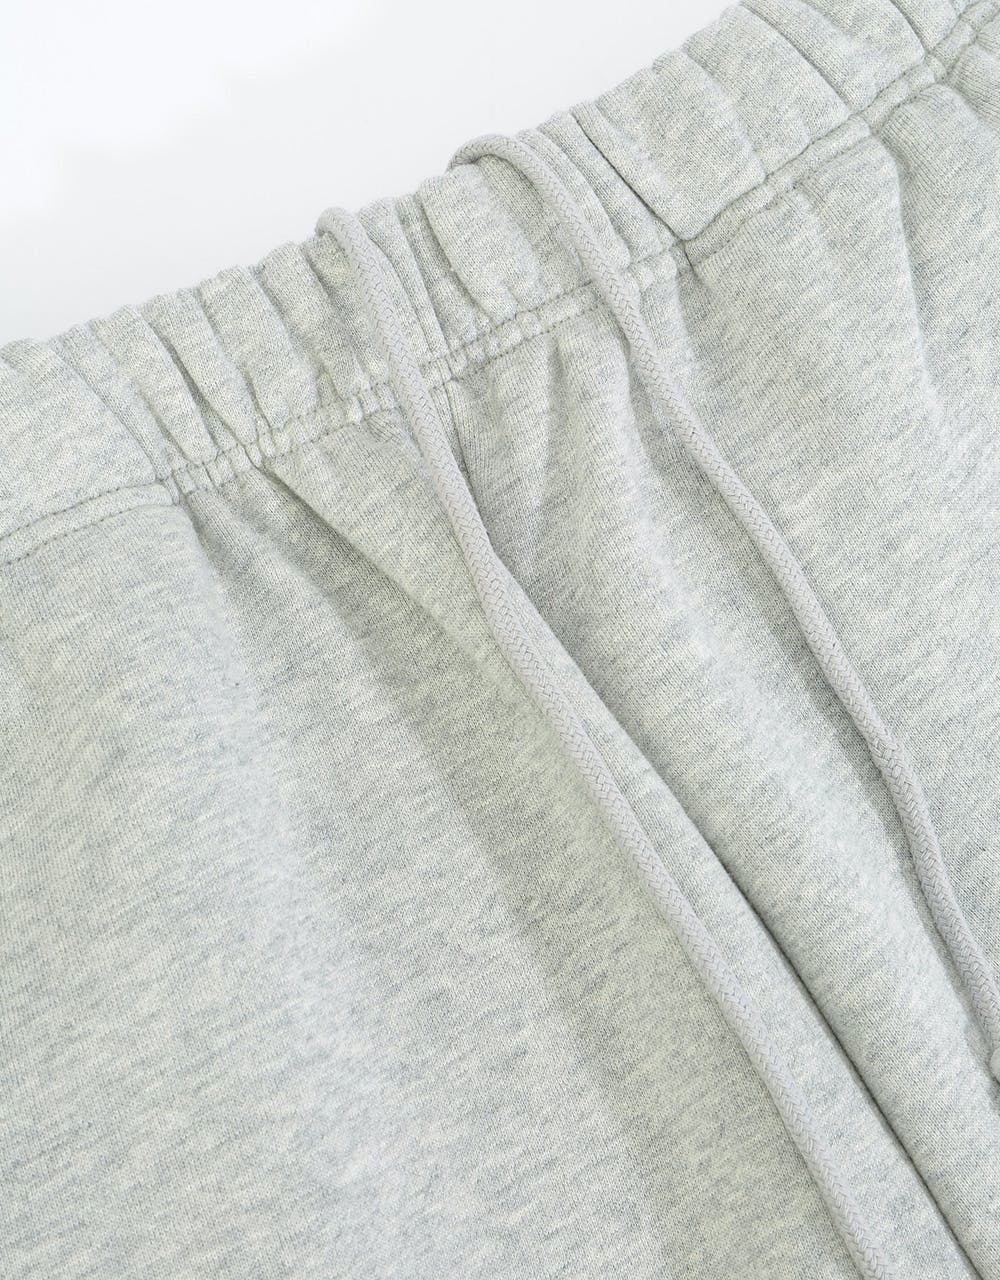 Felt Butterfly Embroidered Sweatpants - Heather Grey